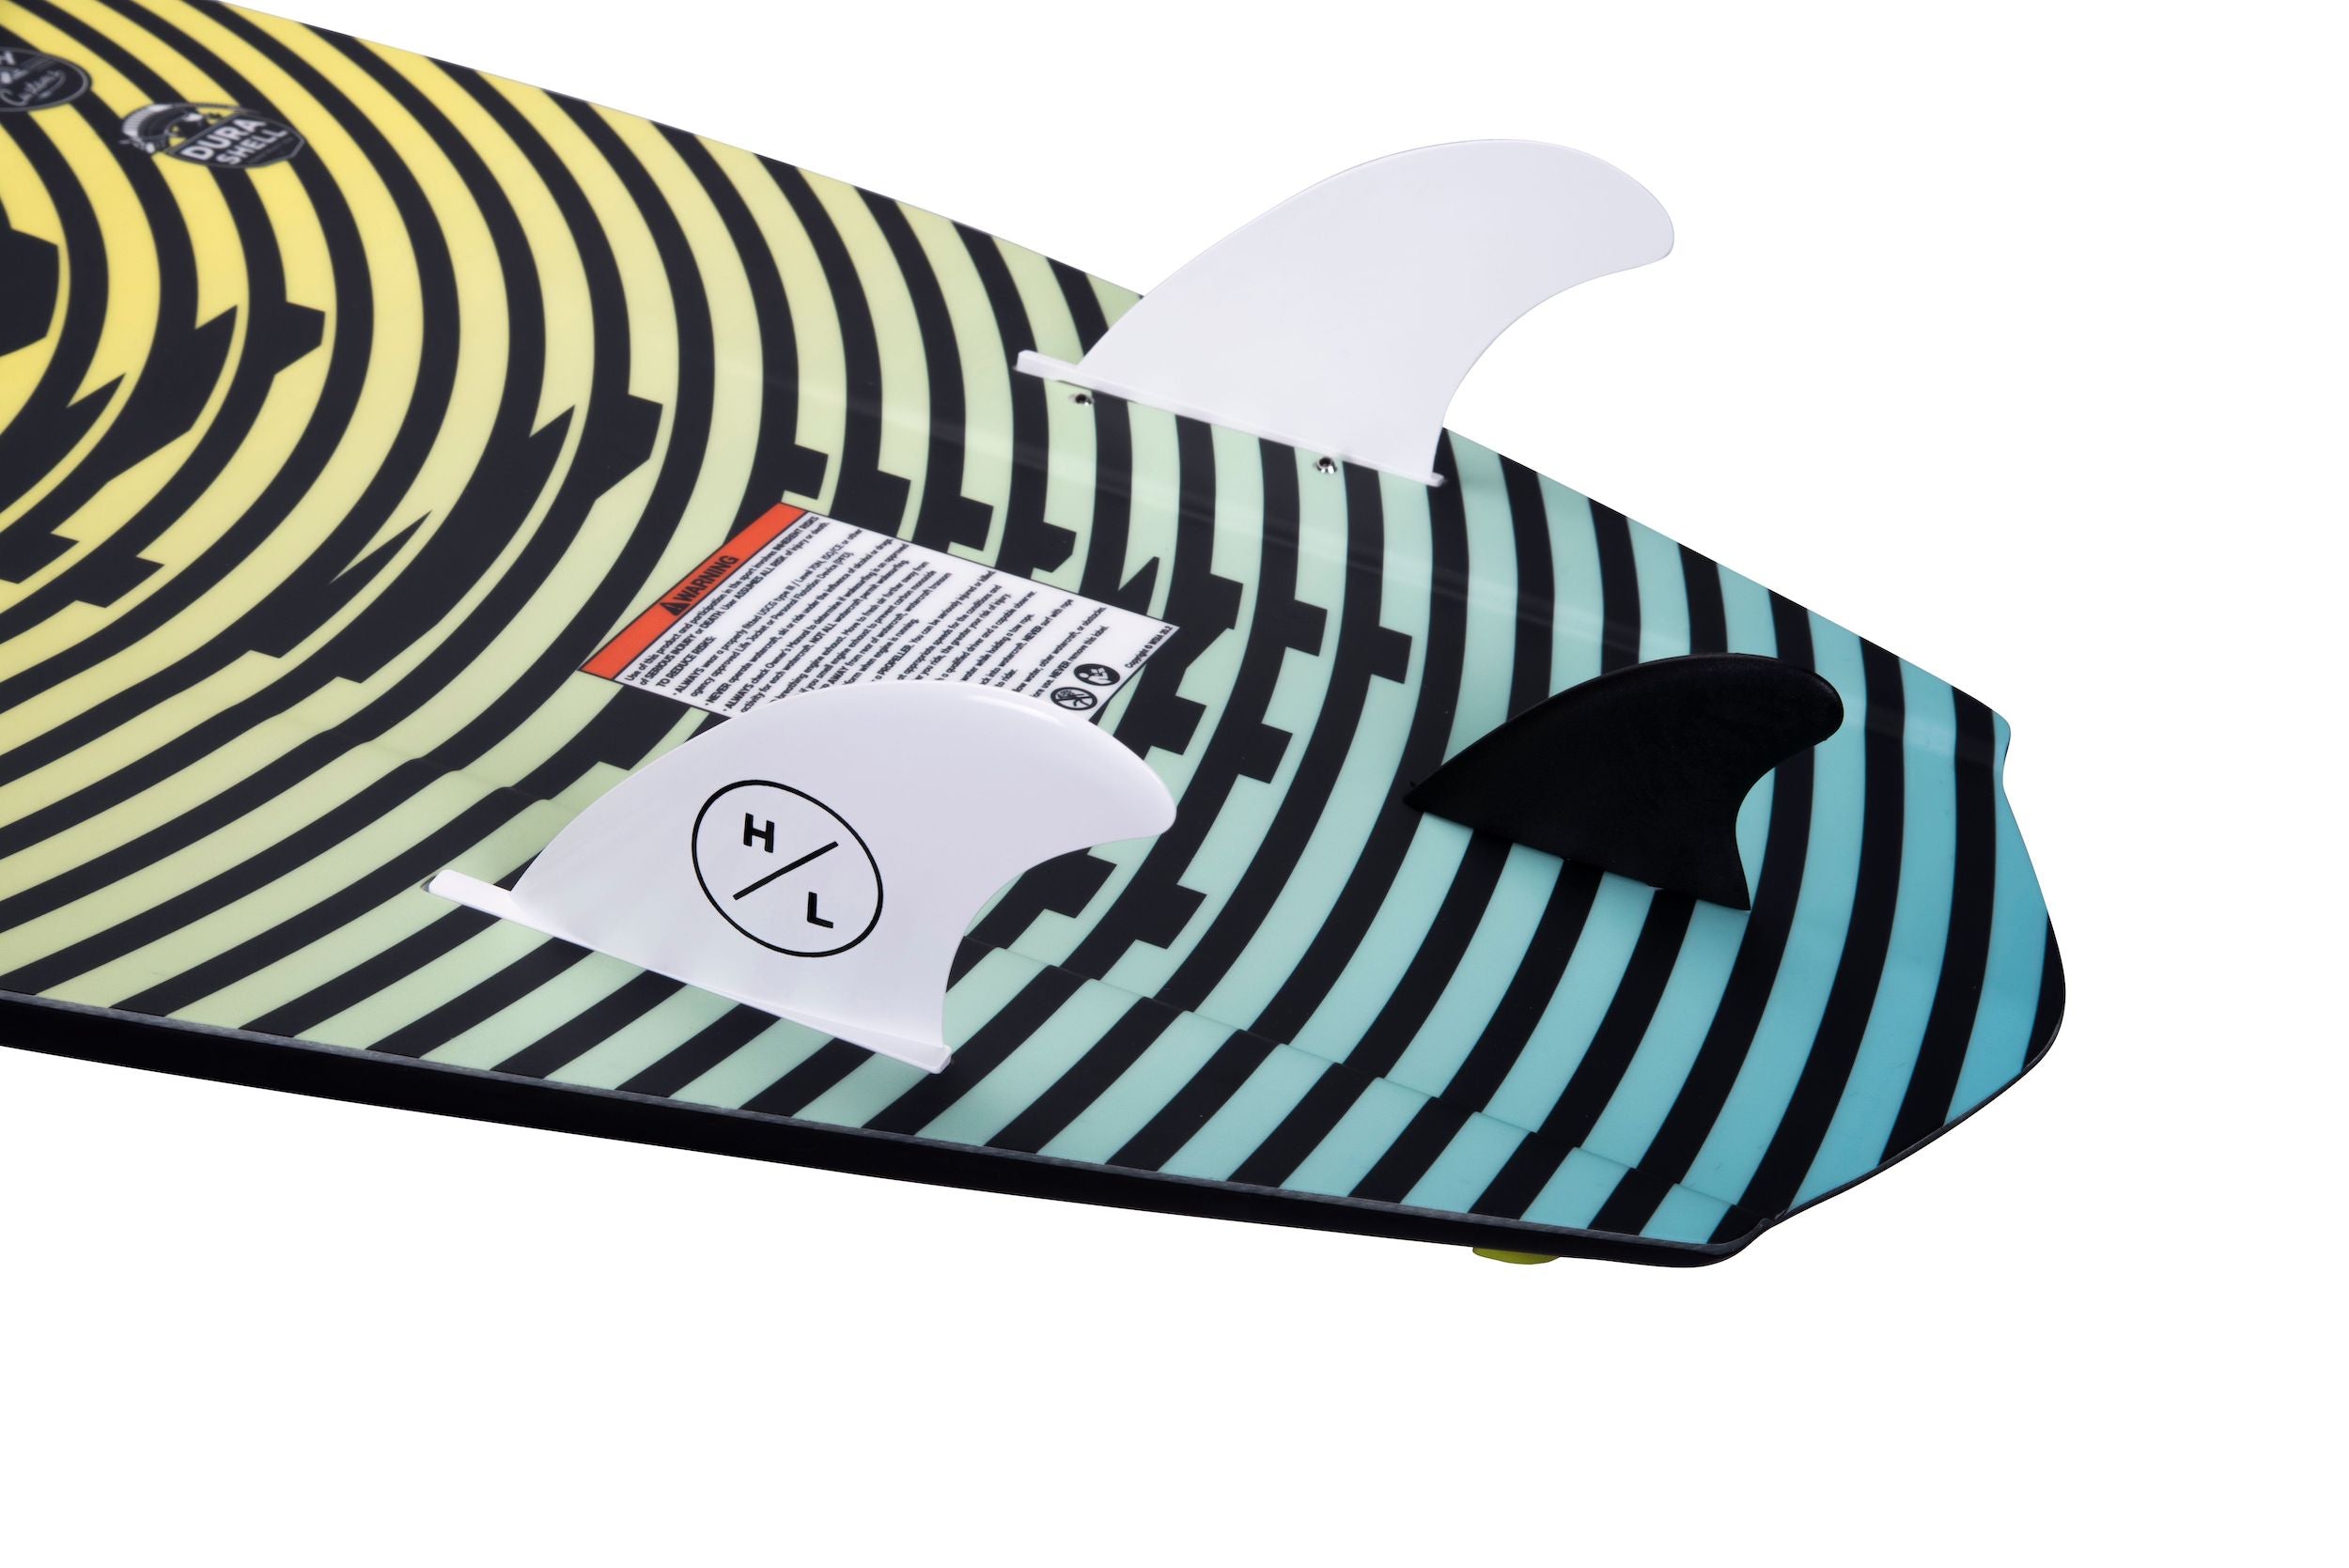 A Hyperlite 2024 Shim Wakesurf Board with SHIM fins and DuraShell Construction, perfect for the wakesurf enthusiast.